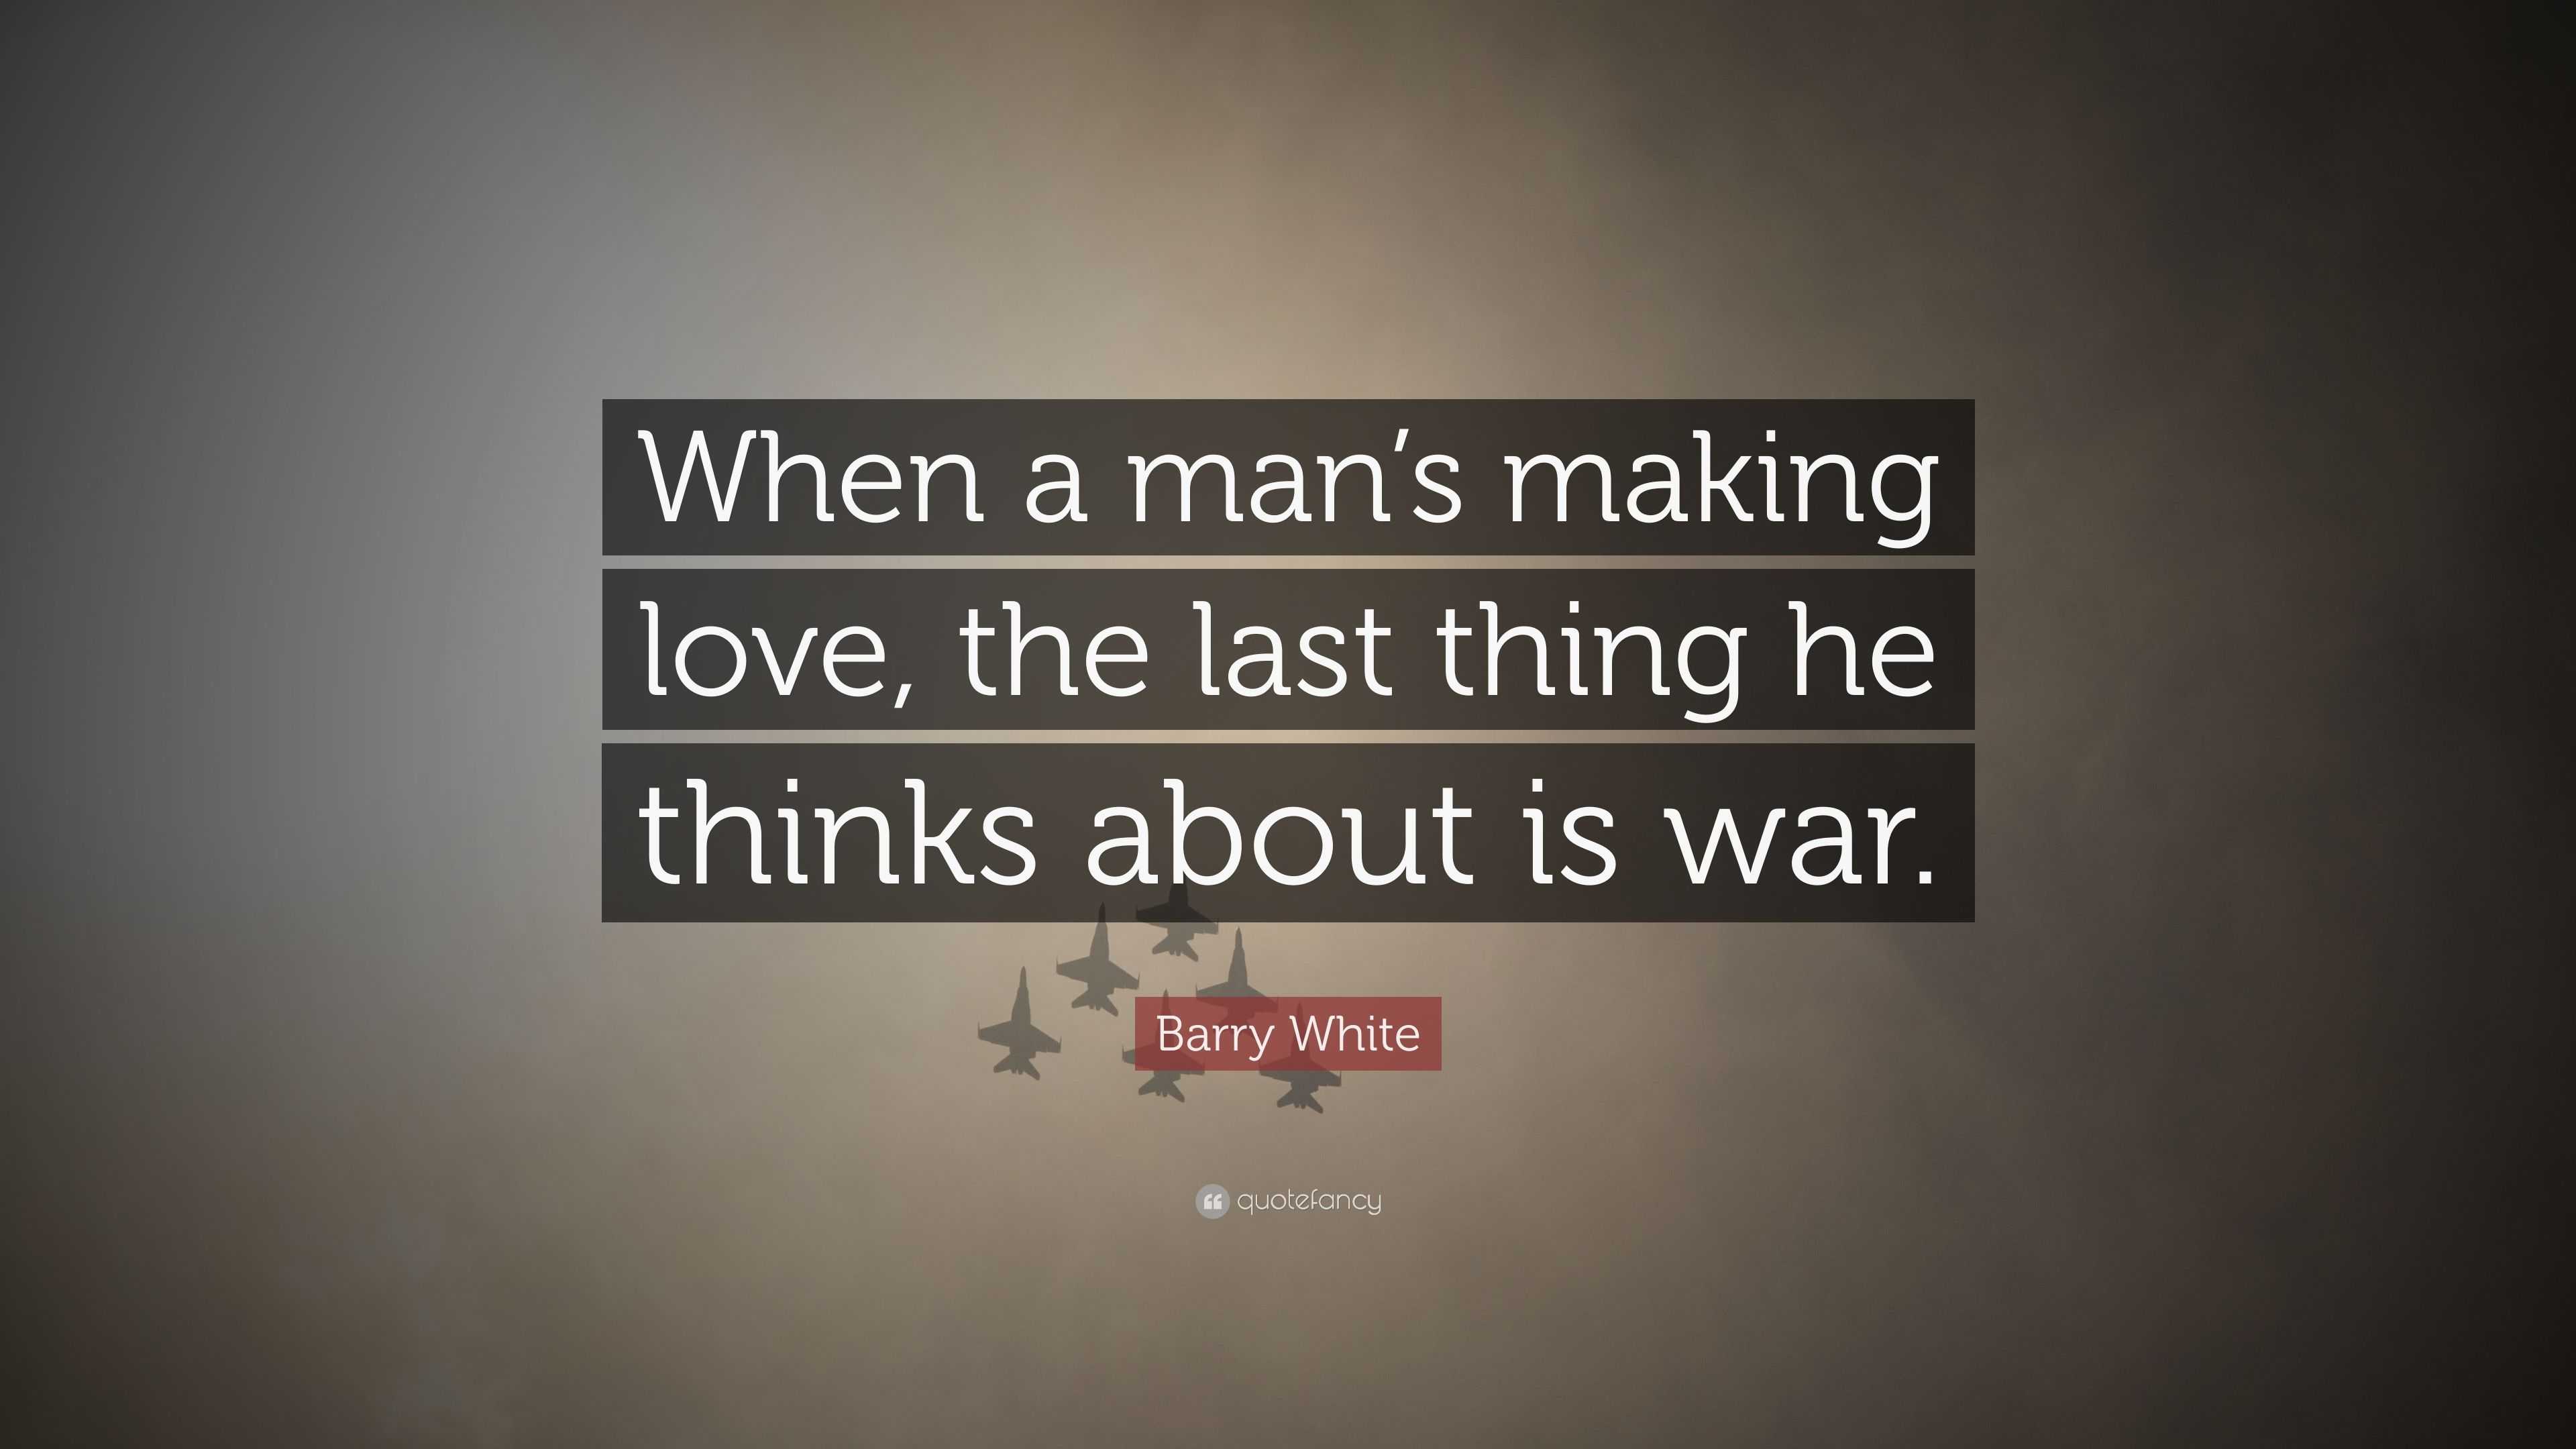 Barry White Quote “When a man s making love the last thing he thinks